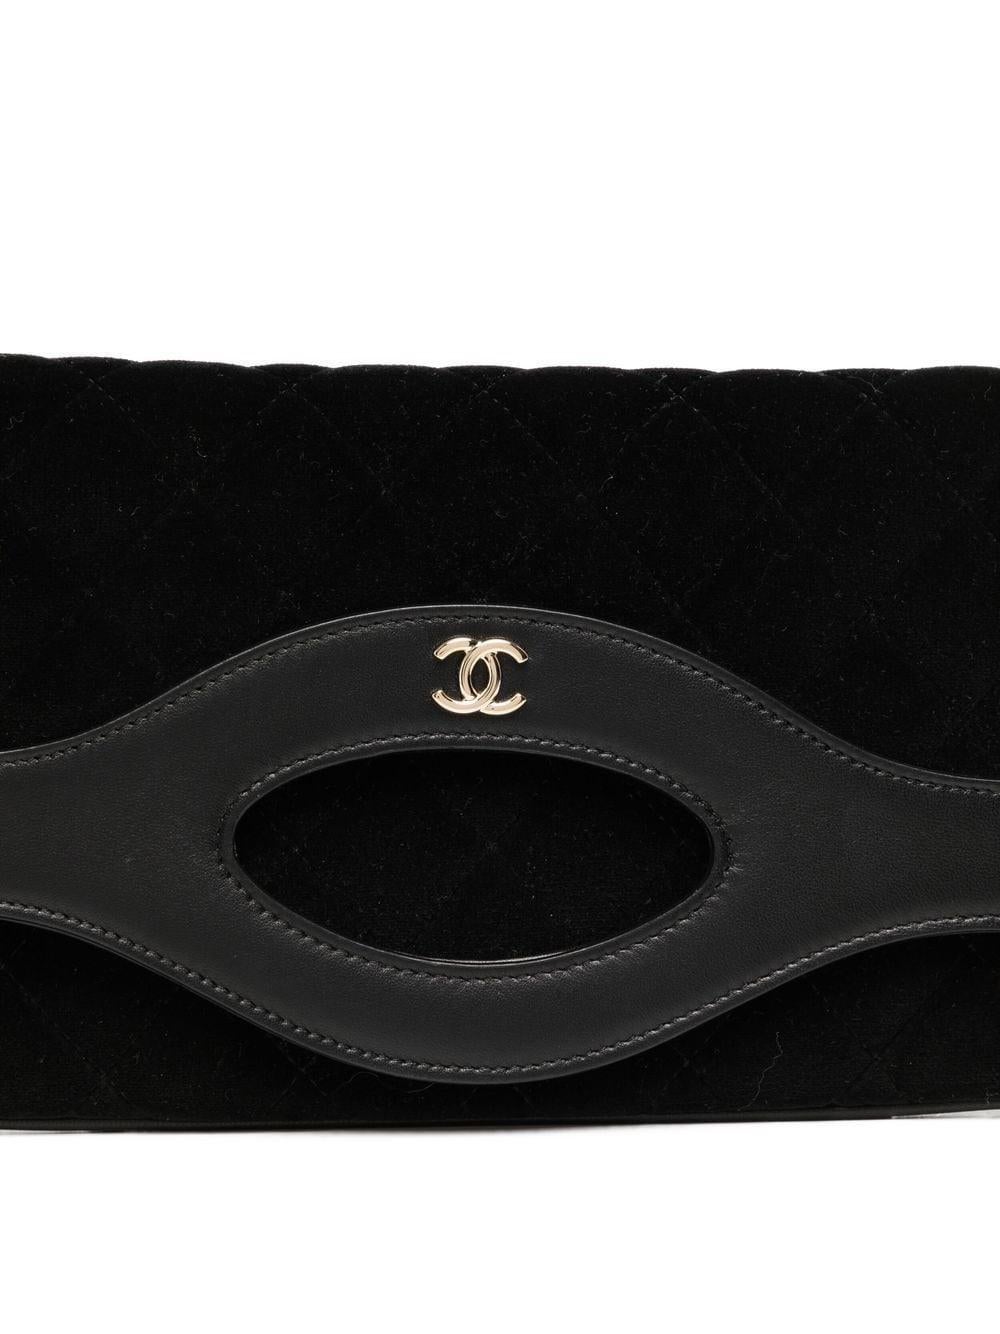 This luxurious 31 Diamond-Quilted Clutch Bag from Chanel features a velvet & leather blend material, diamond quilting, signature interlocking CC logo, single top handle, foldover top, top zip fastening, main compartment, and internal zip-fastening